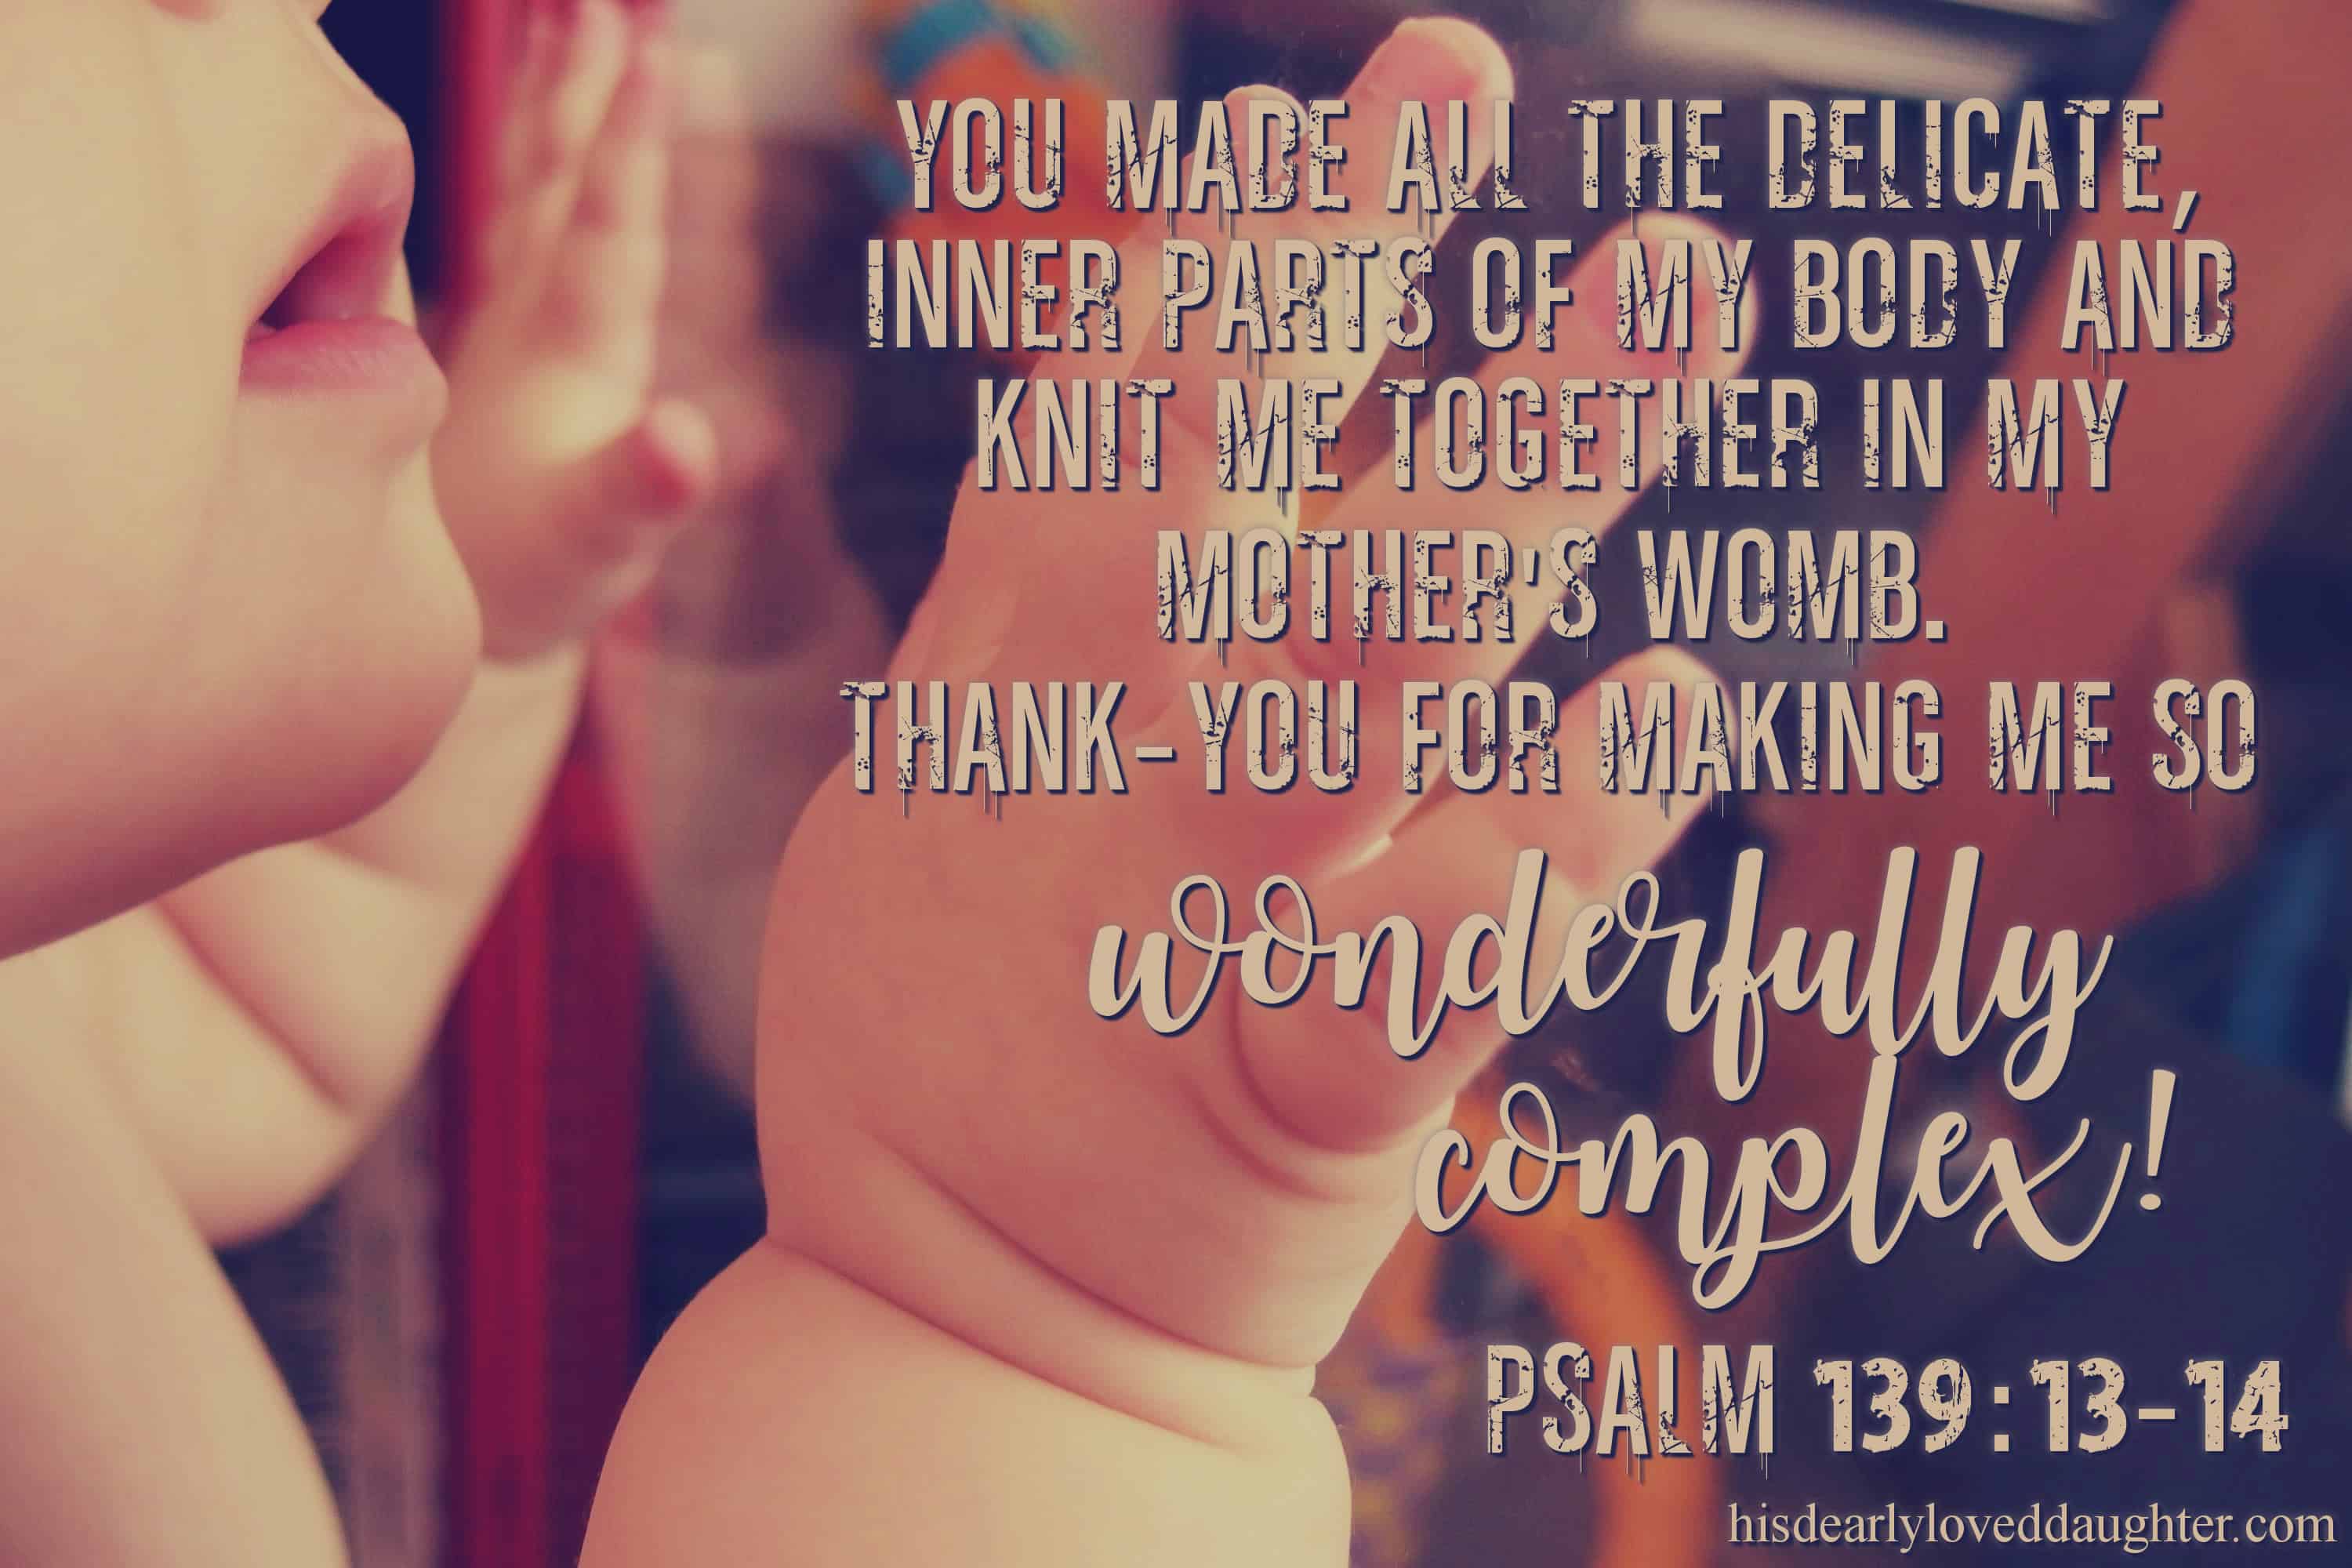 You made all the delicate inner parts of my body and knit me together in my mother's womb. Thank-you for making me so wonderfully complex! Psalms 139:13-14